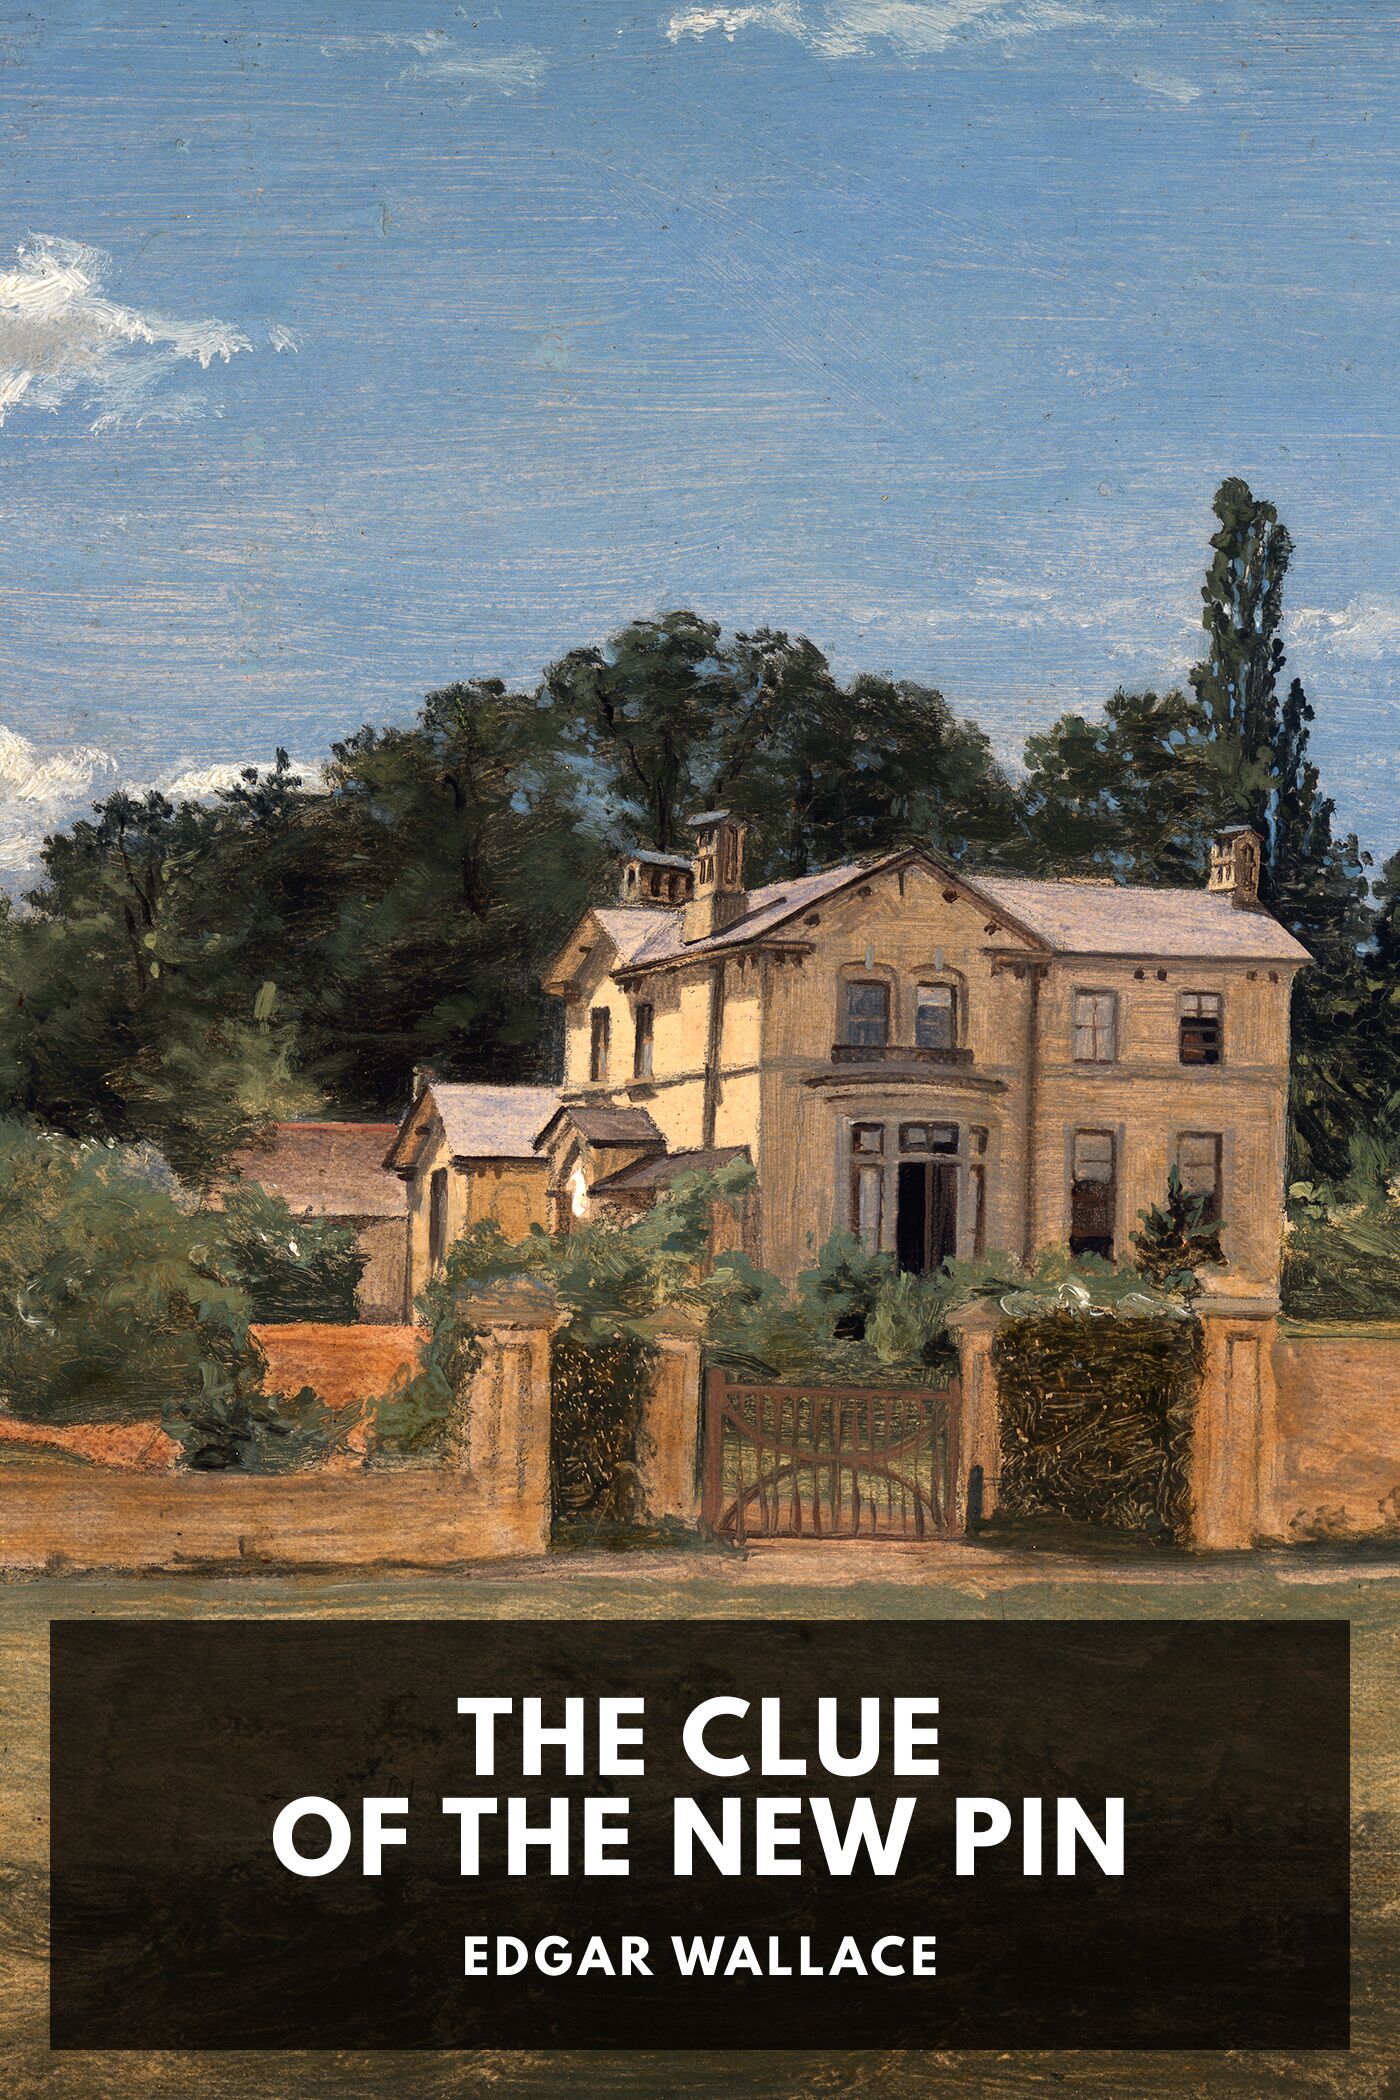 https://standardebooks.org/ebooks/edgar-wallace/the-clue-of-the-new-pin/downloads/cover.jpg